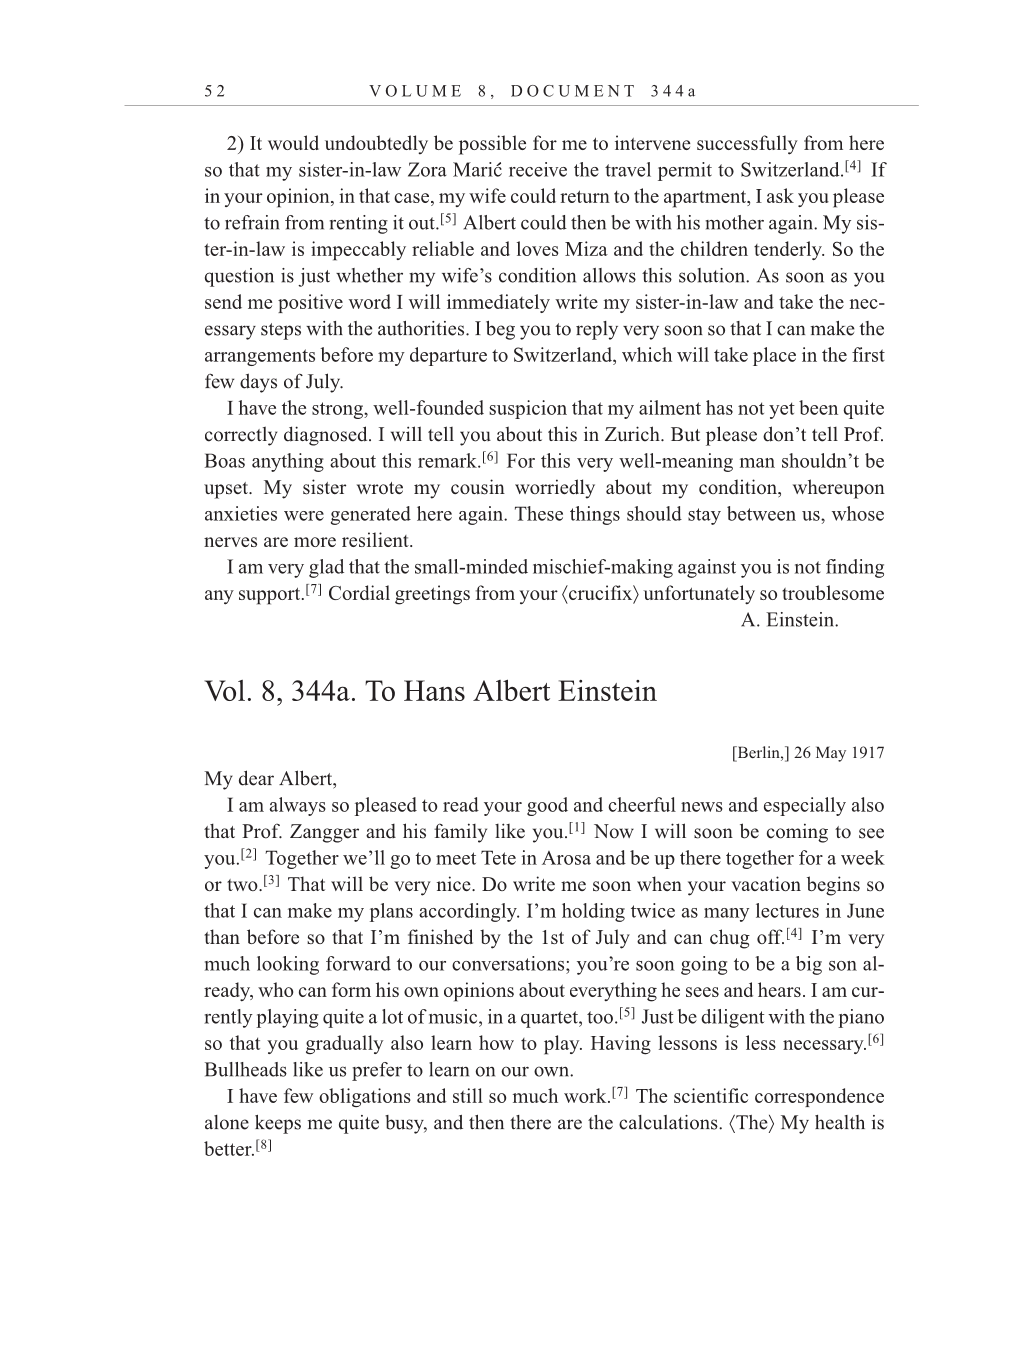 Volume 10: The Berlin Years: Correspondence, May-December 1920, and Supplementary Correspondence, 1909-1920 (English translation supplement) page 52